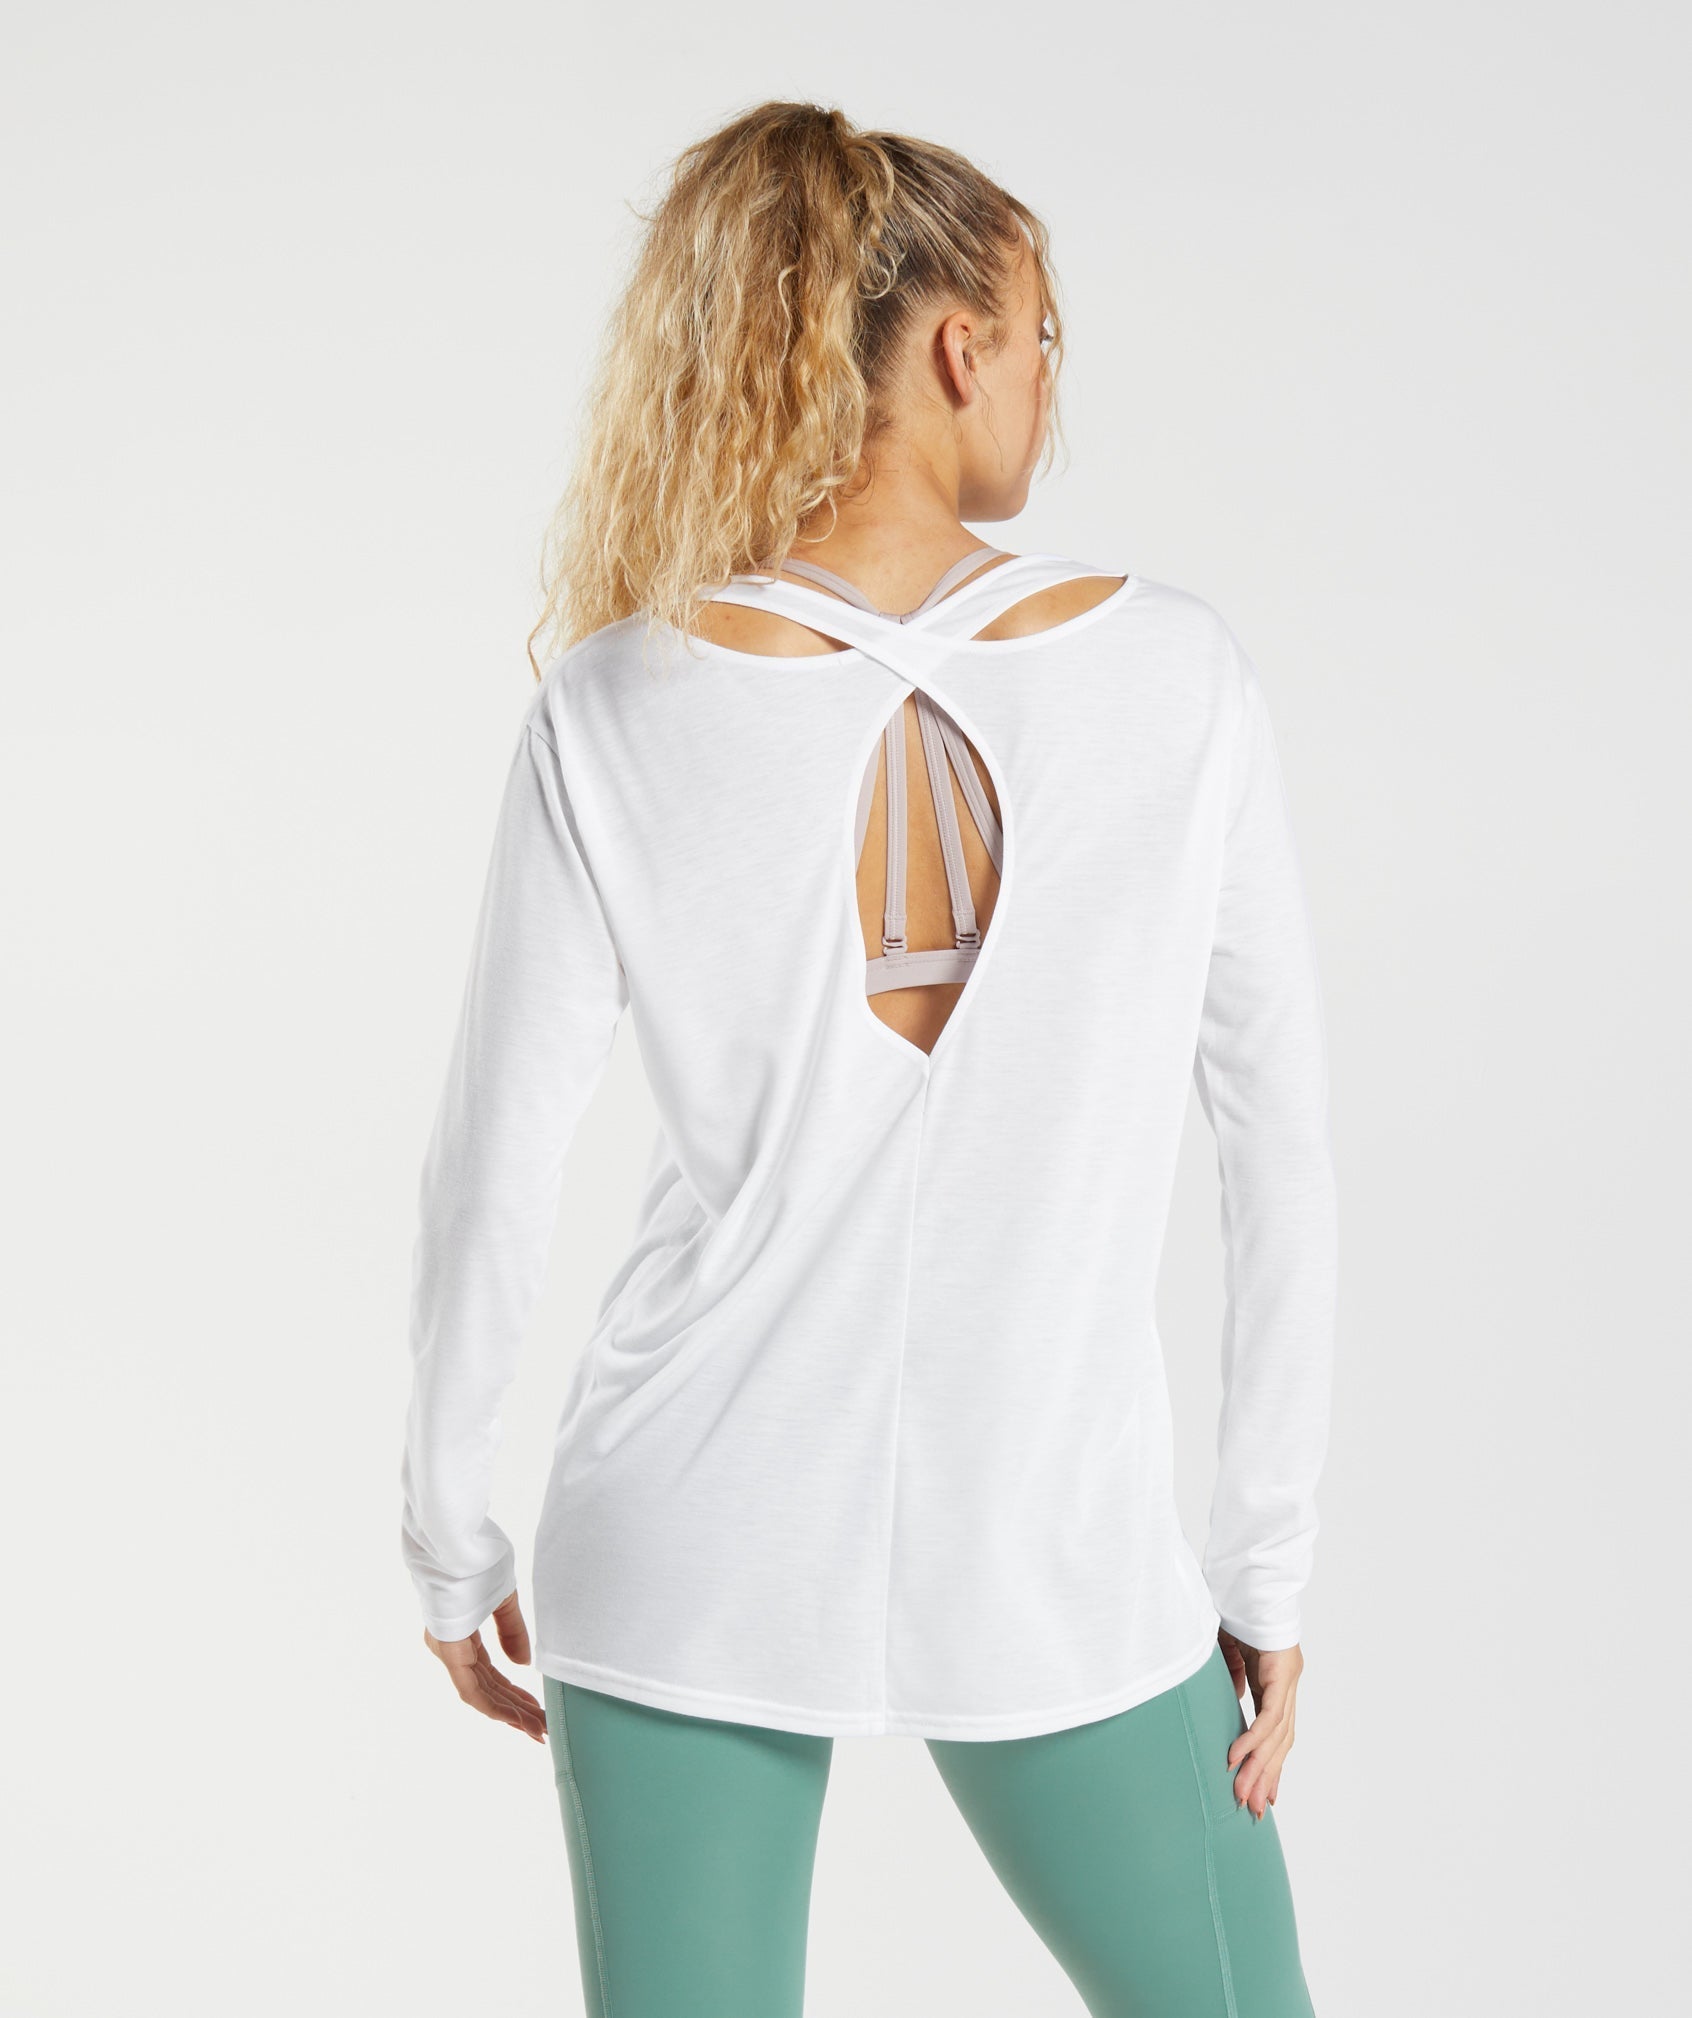 Super Soft Cut-Out Long Sleeve Top in White - view 2